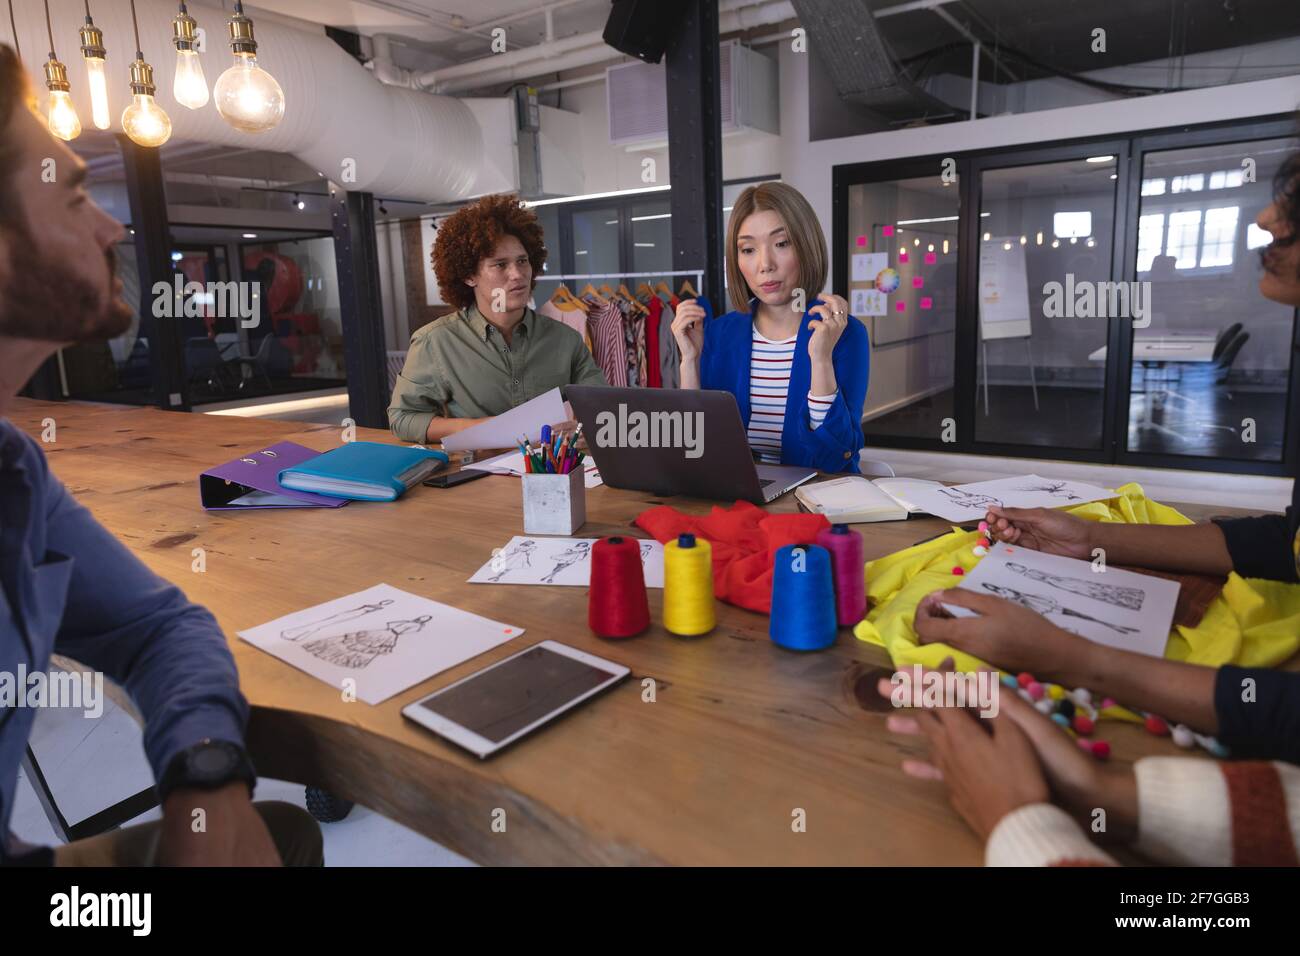 Diverse group of creative fashion designers colleagues brainstorming in meeting room Stock Photo